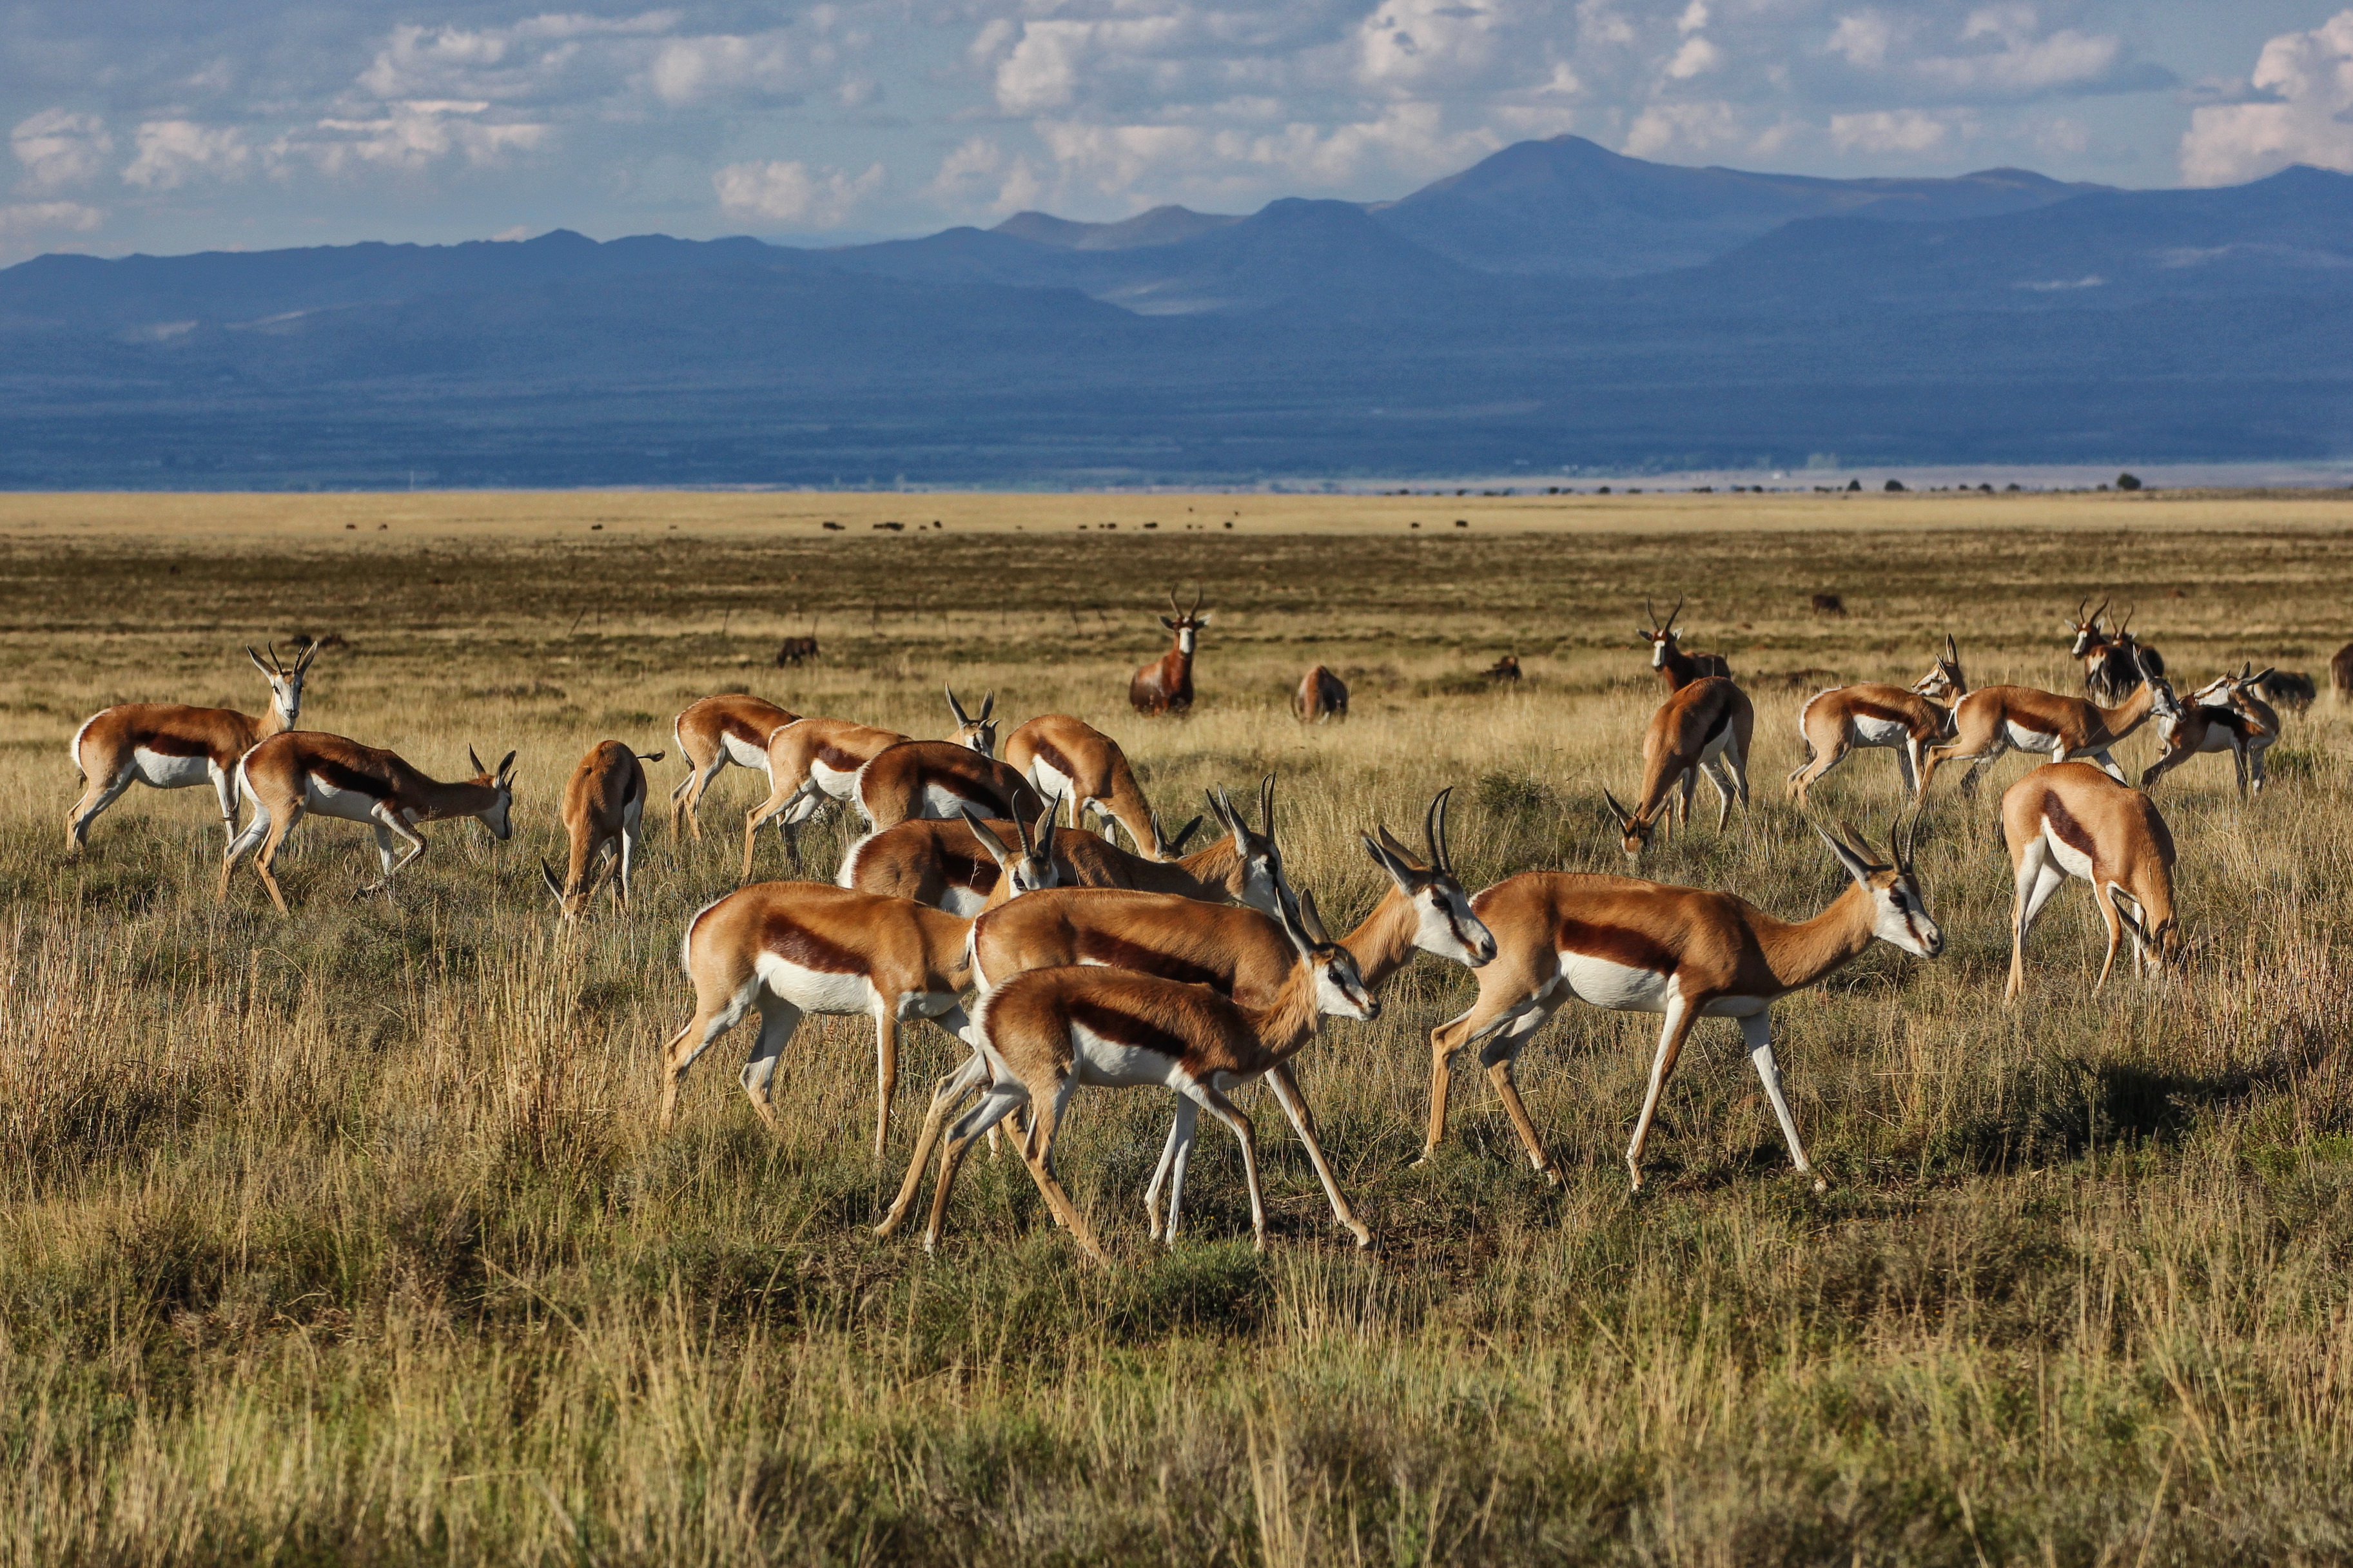 The plains were once white with massed springbok herds.